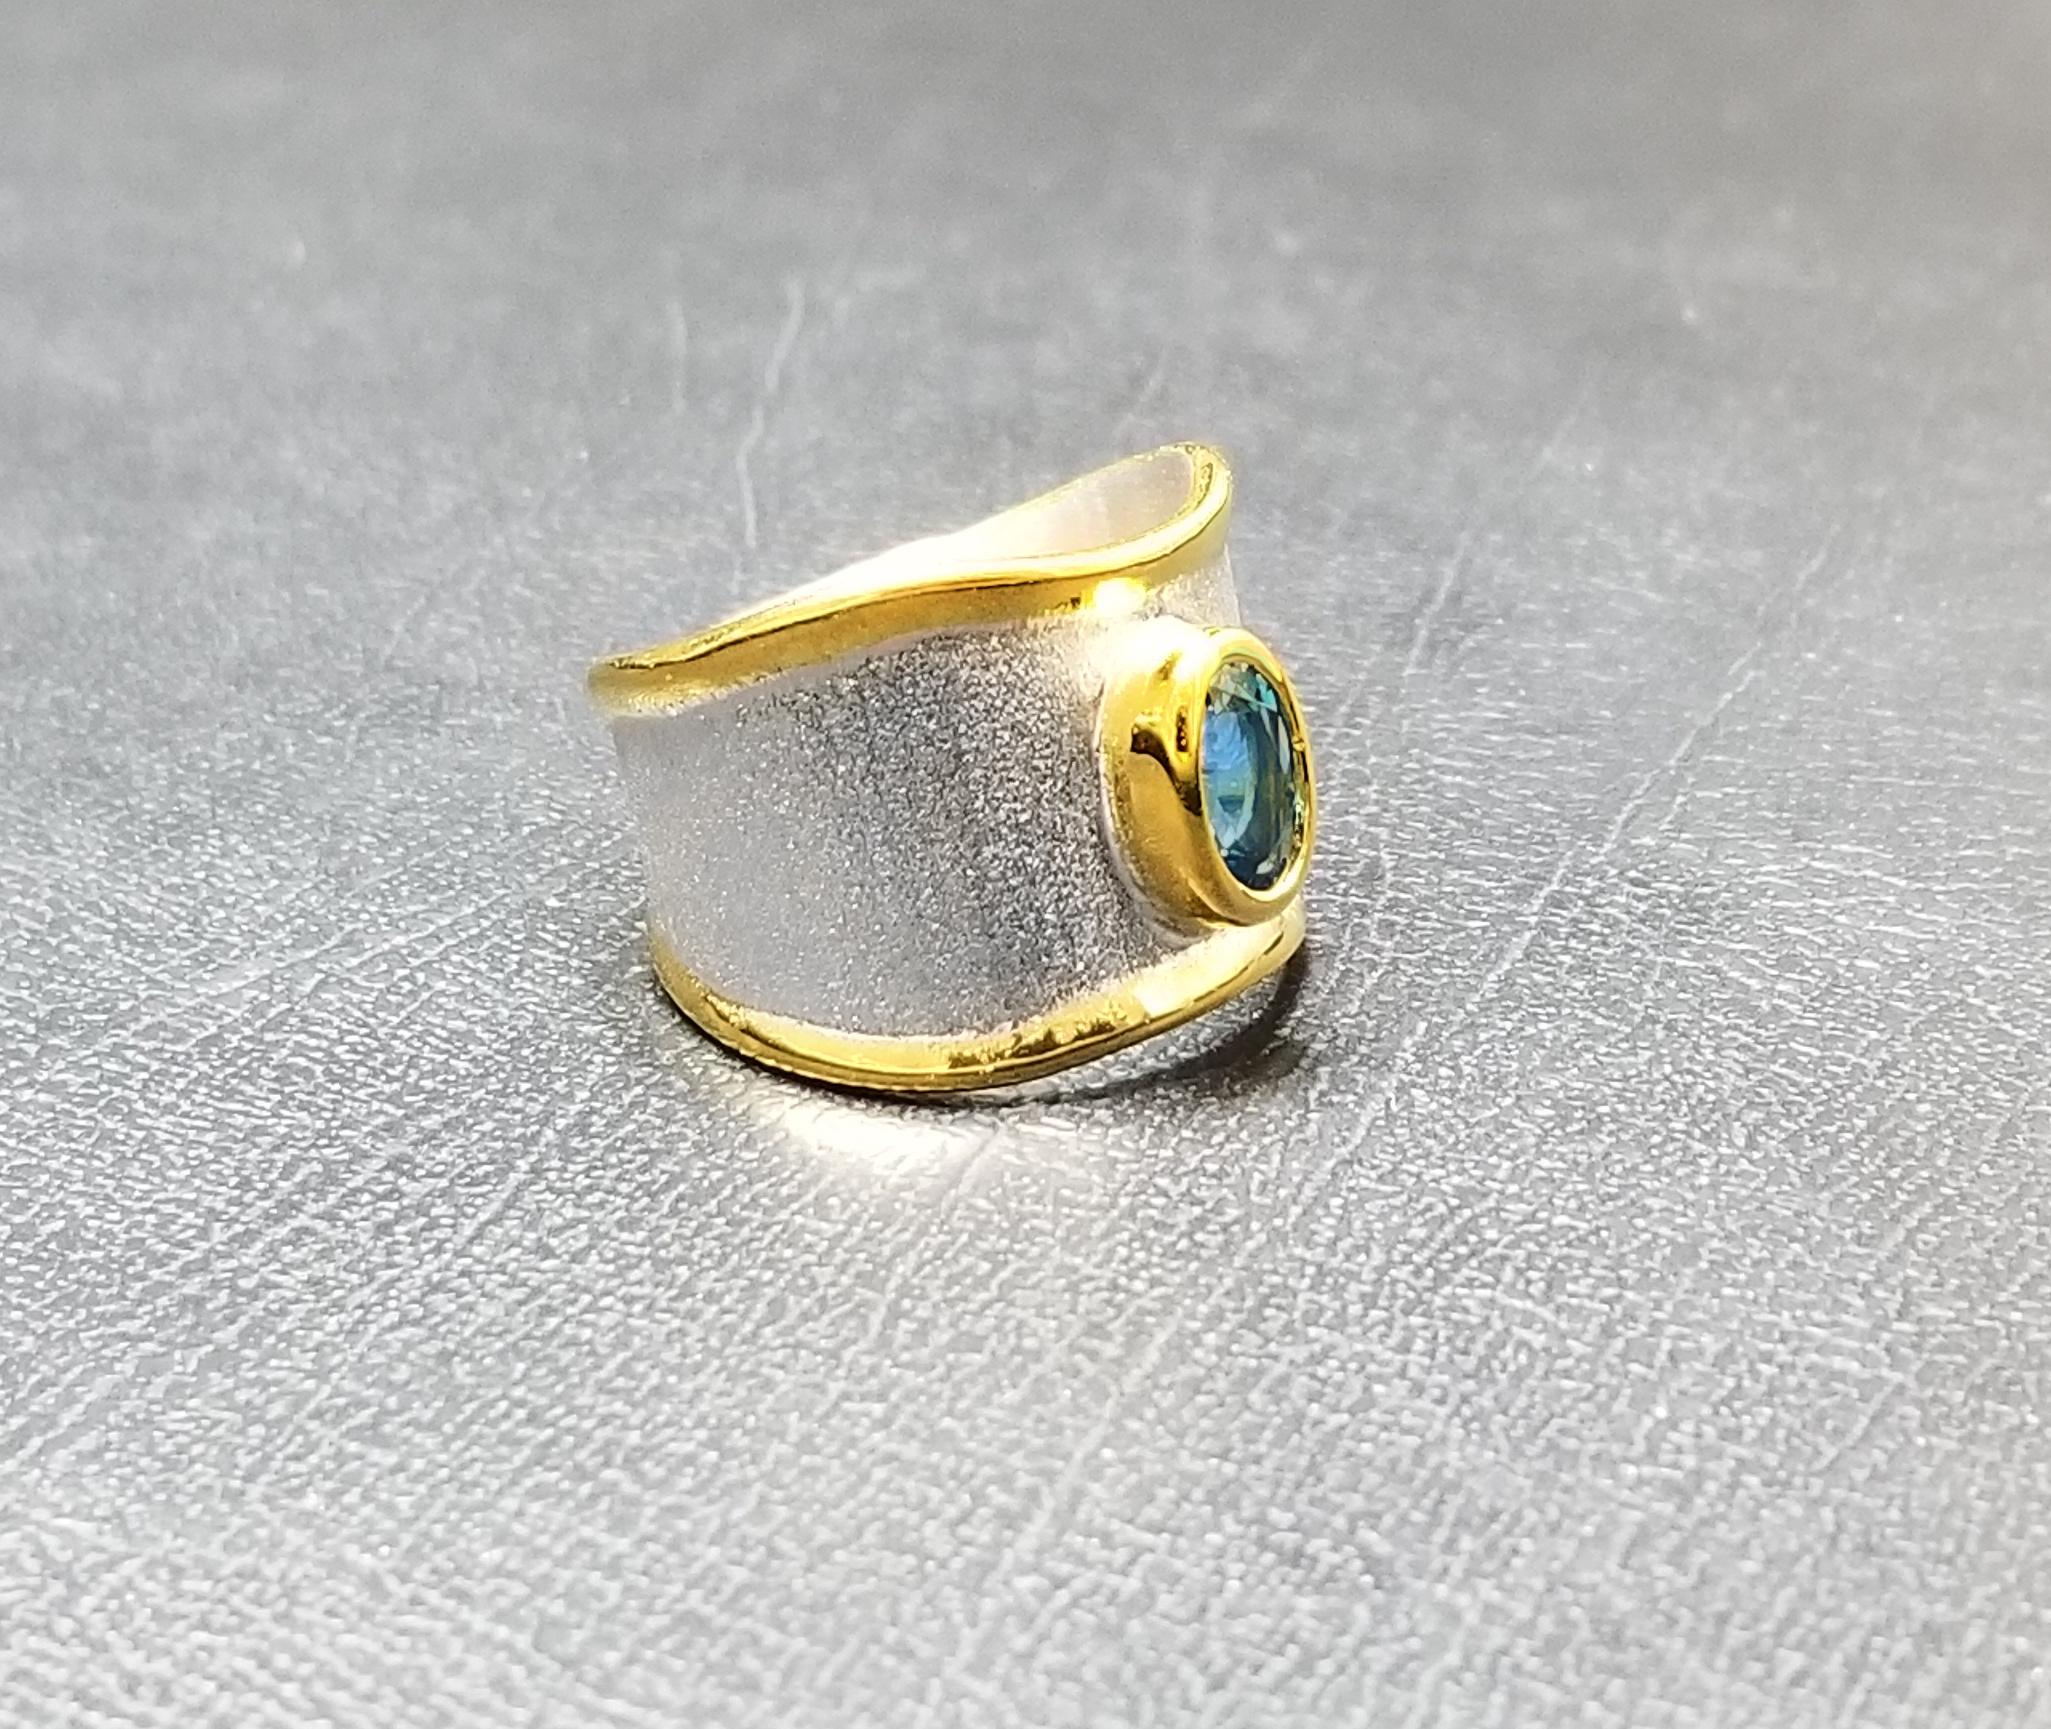 From Yianni Creations - Midas Collection, this is a 950 purity of fine silver ring handmade in Greece. This gorgeous ring is plated with palladium to resist the elements and the unique liquid edges are decorated with 24 Karat gold overlay of 3+